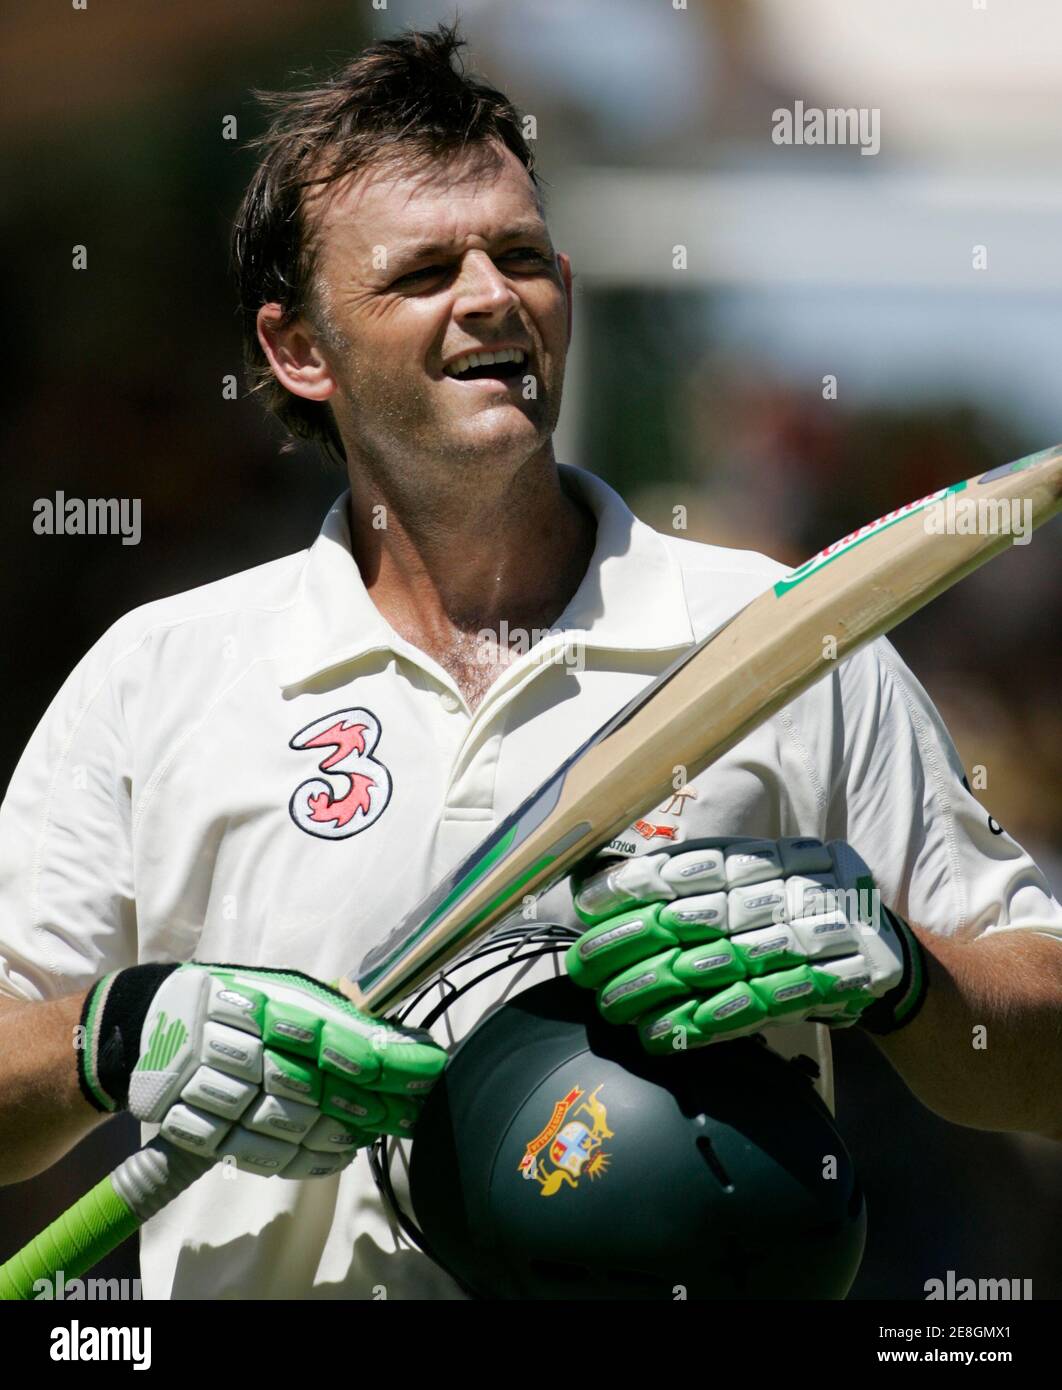 Australia's Adam Gilchrist returns to the pavilion after being dismissed against India during the fourth day of their fourth and final test cricket match at the Adelaide Oval January 27, 2008. Gilchrist announced January 26, 2008 he would retire from the game at the end of this season's international fixtures. REUTERS/Will Burgess   (AUSTRALIA) Stock Photo